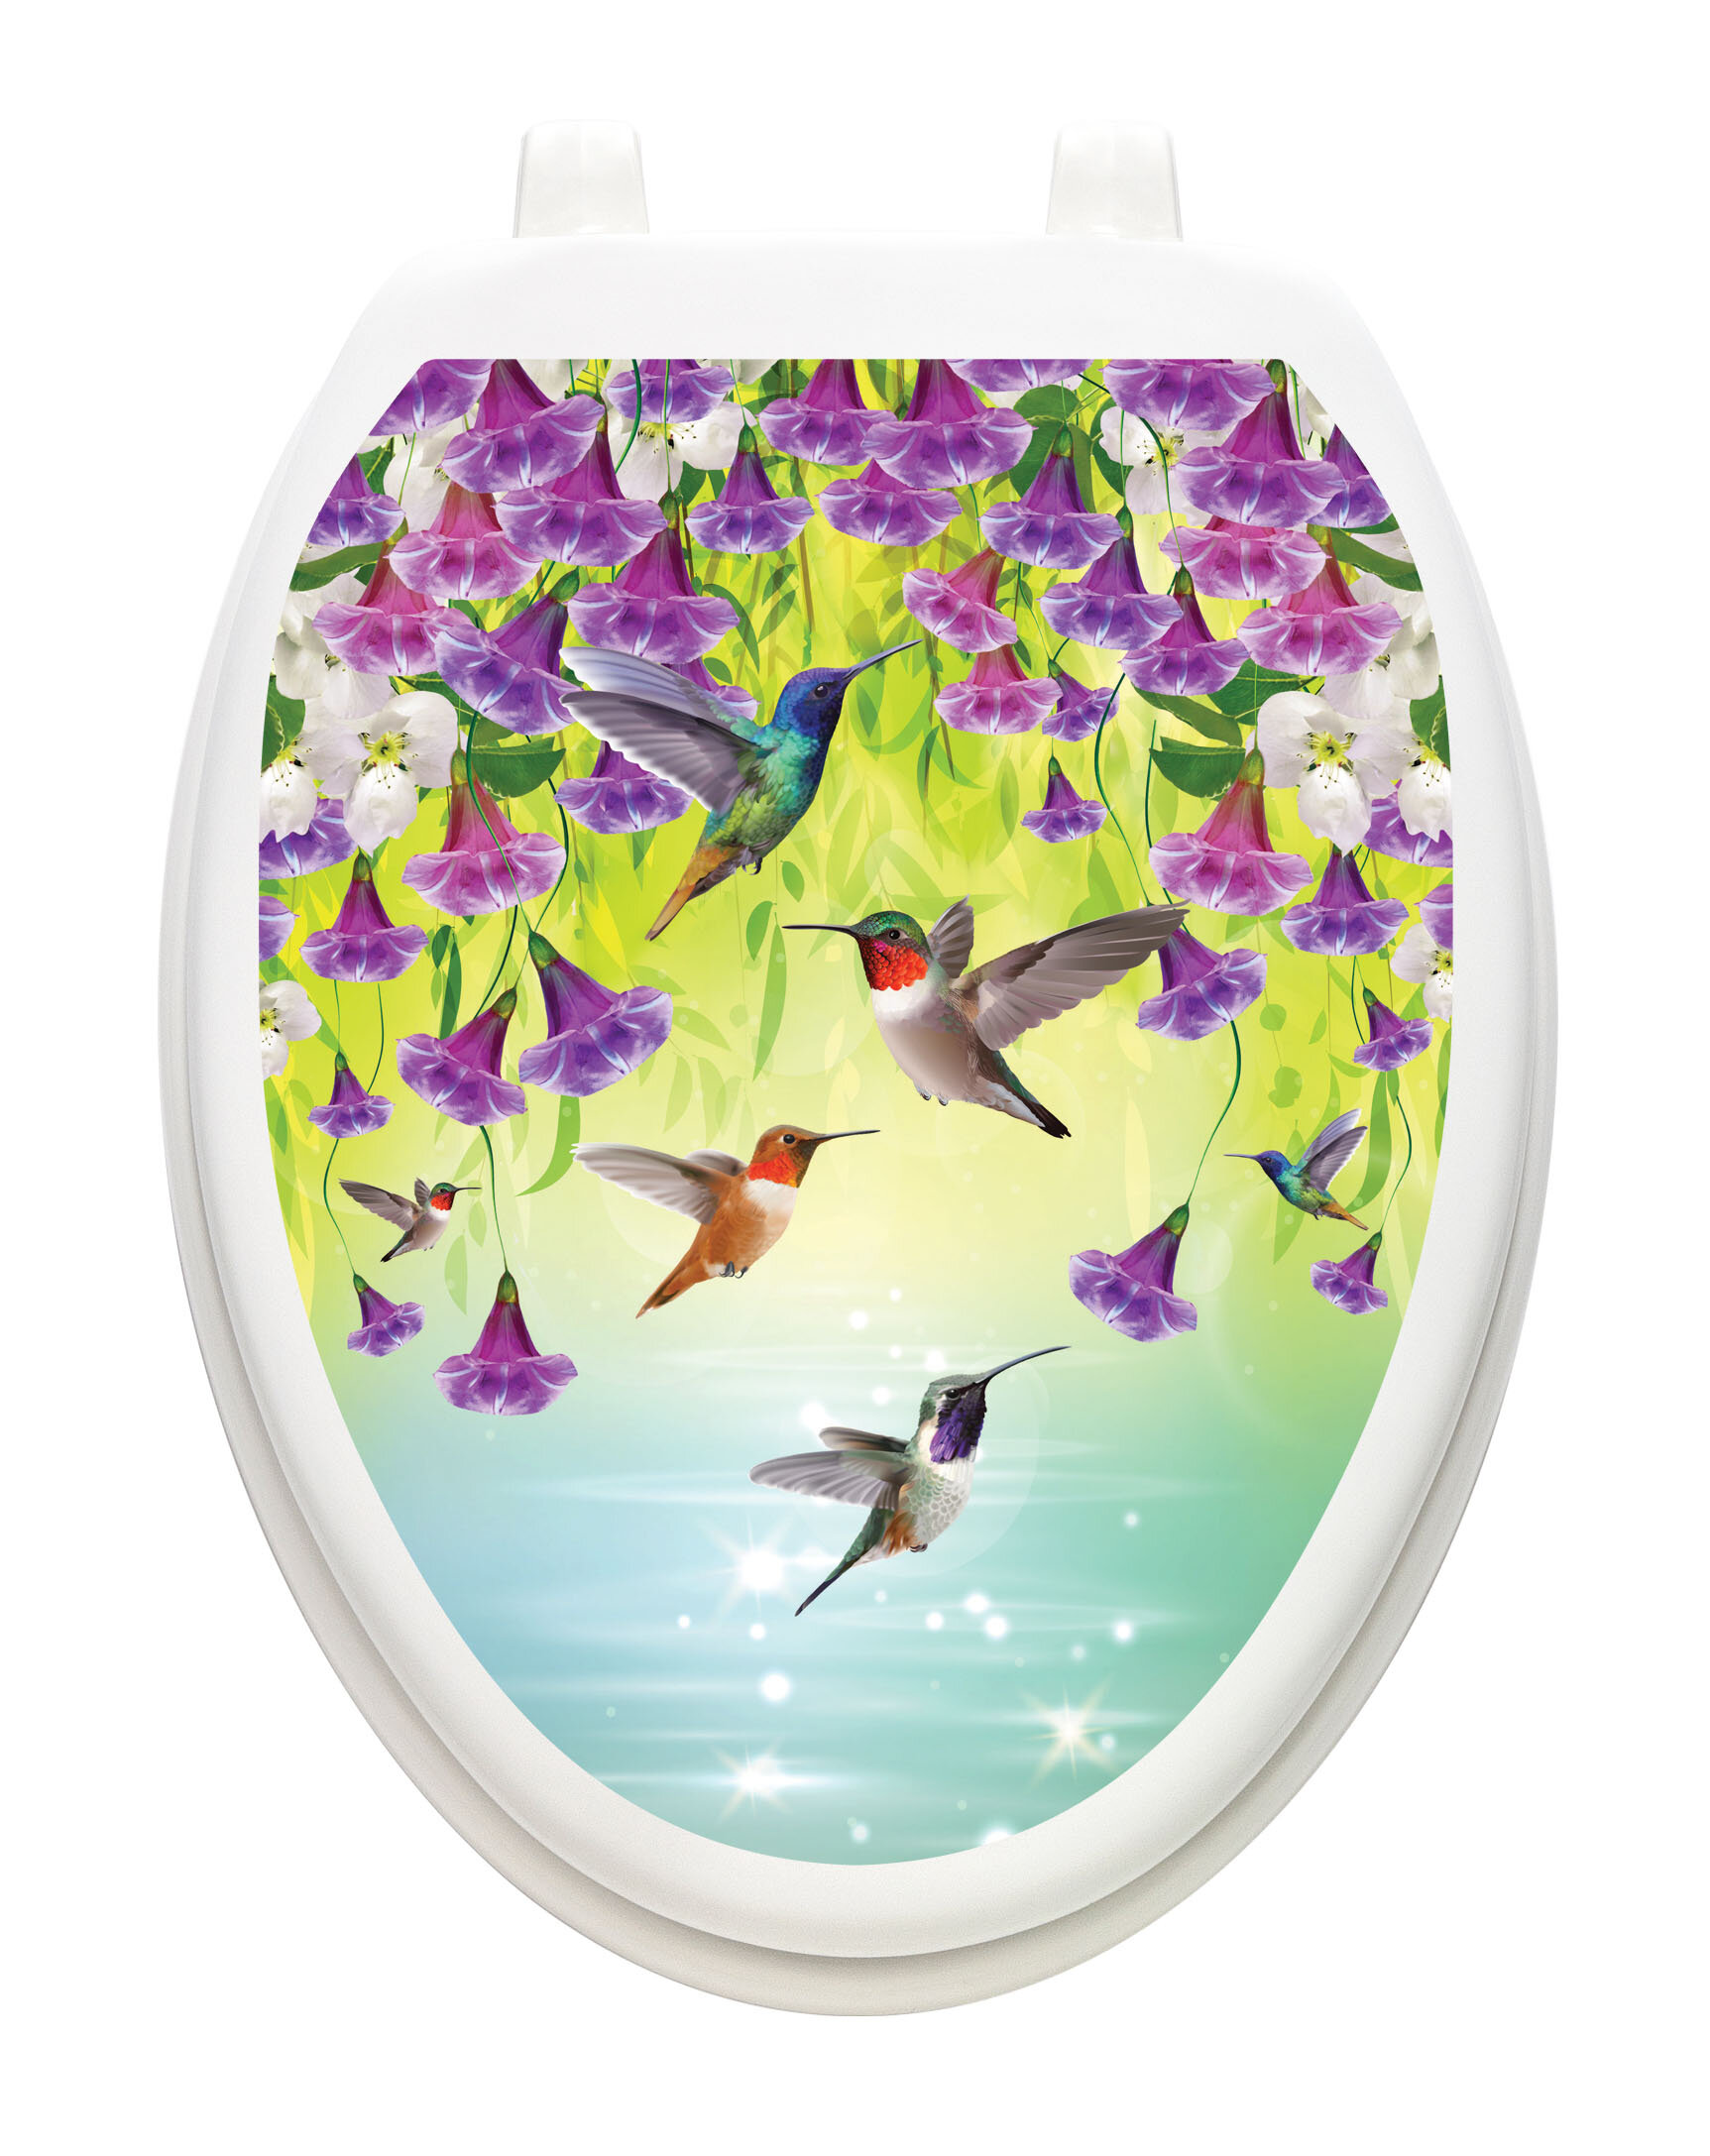 Toilet Seat Cover Decal Hummingbirds Design Toilet Tattoos Size Elongated